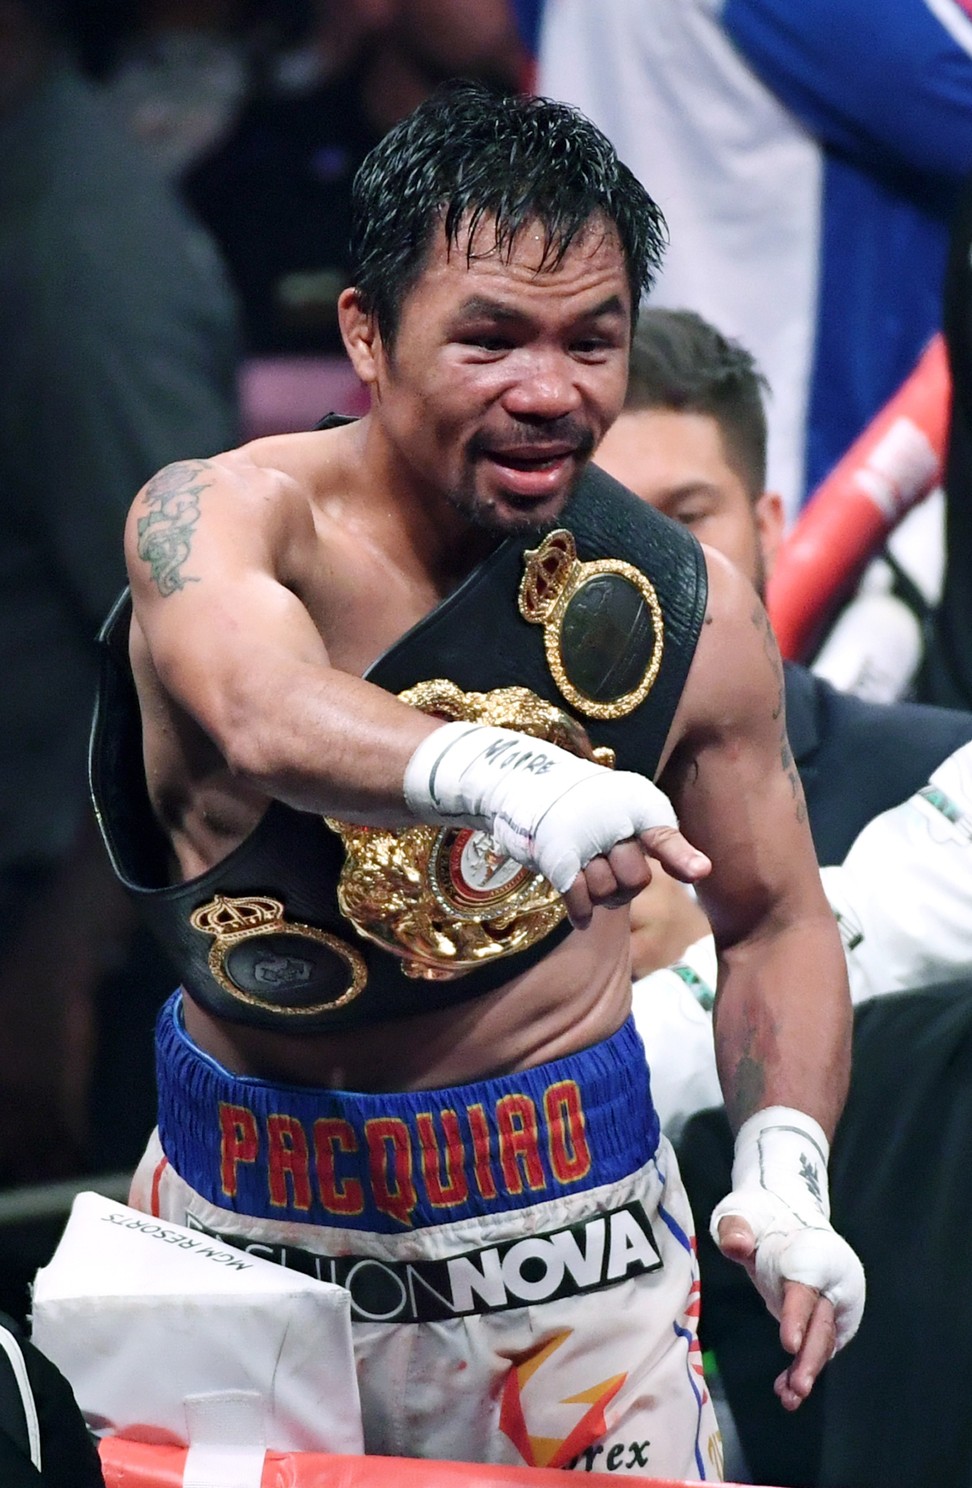 Pacquiao celebrates his split-decision victory over Keith Thurman in their WBA welterweight title fight in July 2019. Photo: AFP